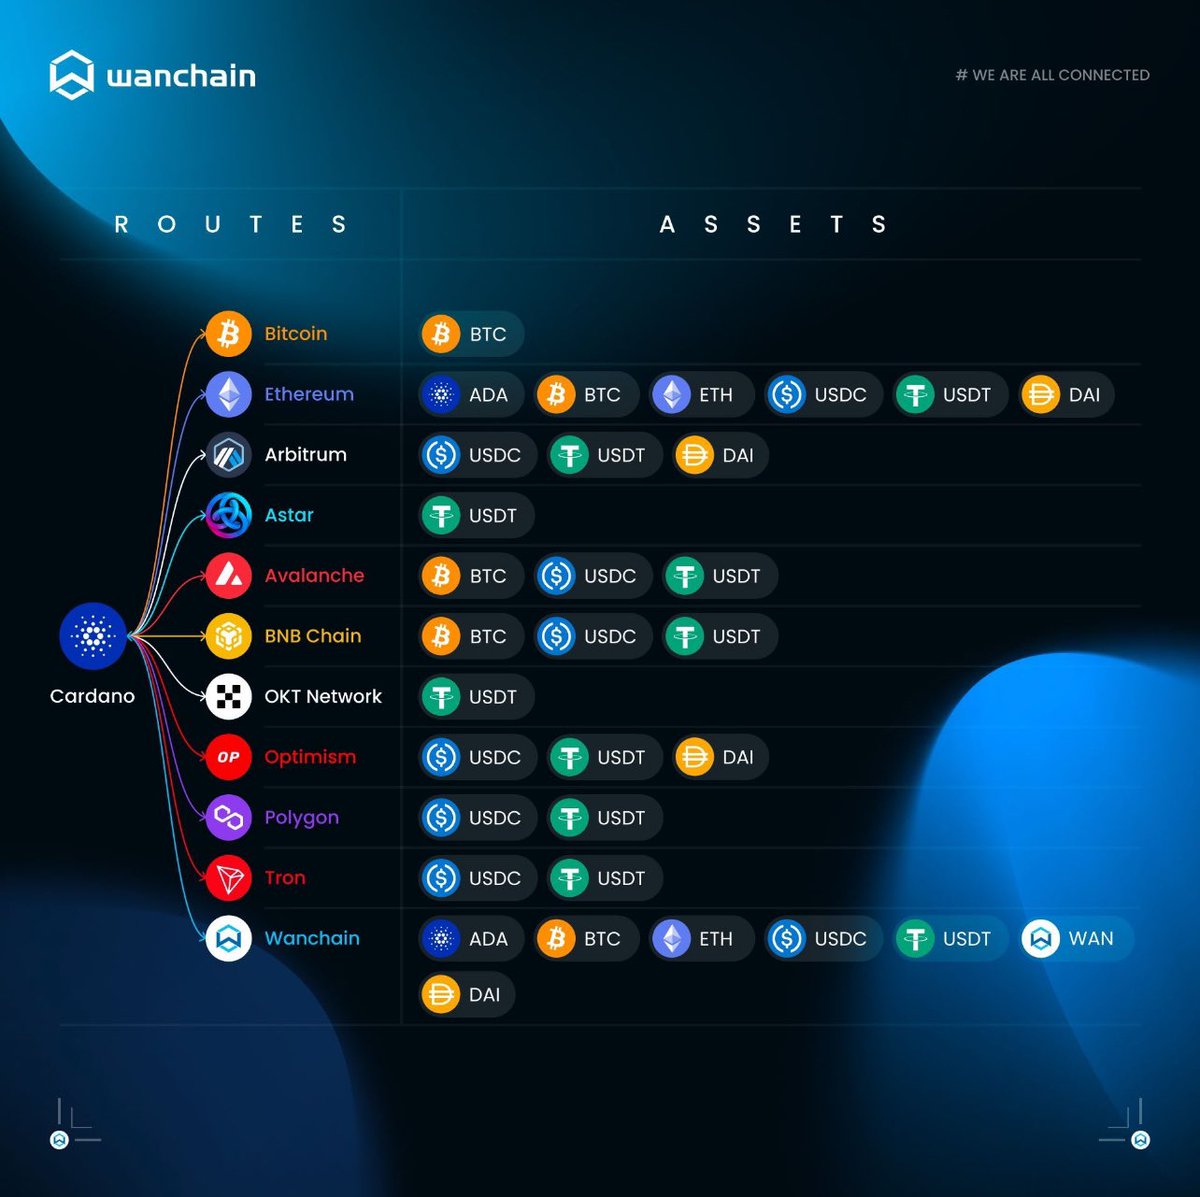 Look how interconnected #cardano is now thanks to #wanchain.
Bringing stablecoins to and from cardano👀
Wanchain even does this with ethereum, btc, and many L2s. Xrp, ltc, doge, bsc, and so many more.
#weareallconnected 🤝🌁🌉